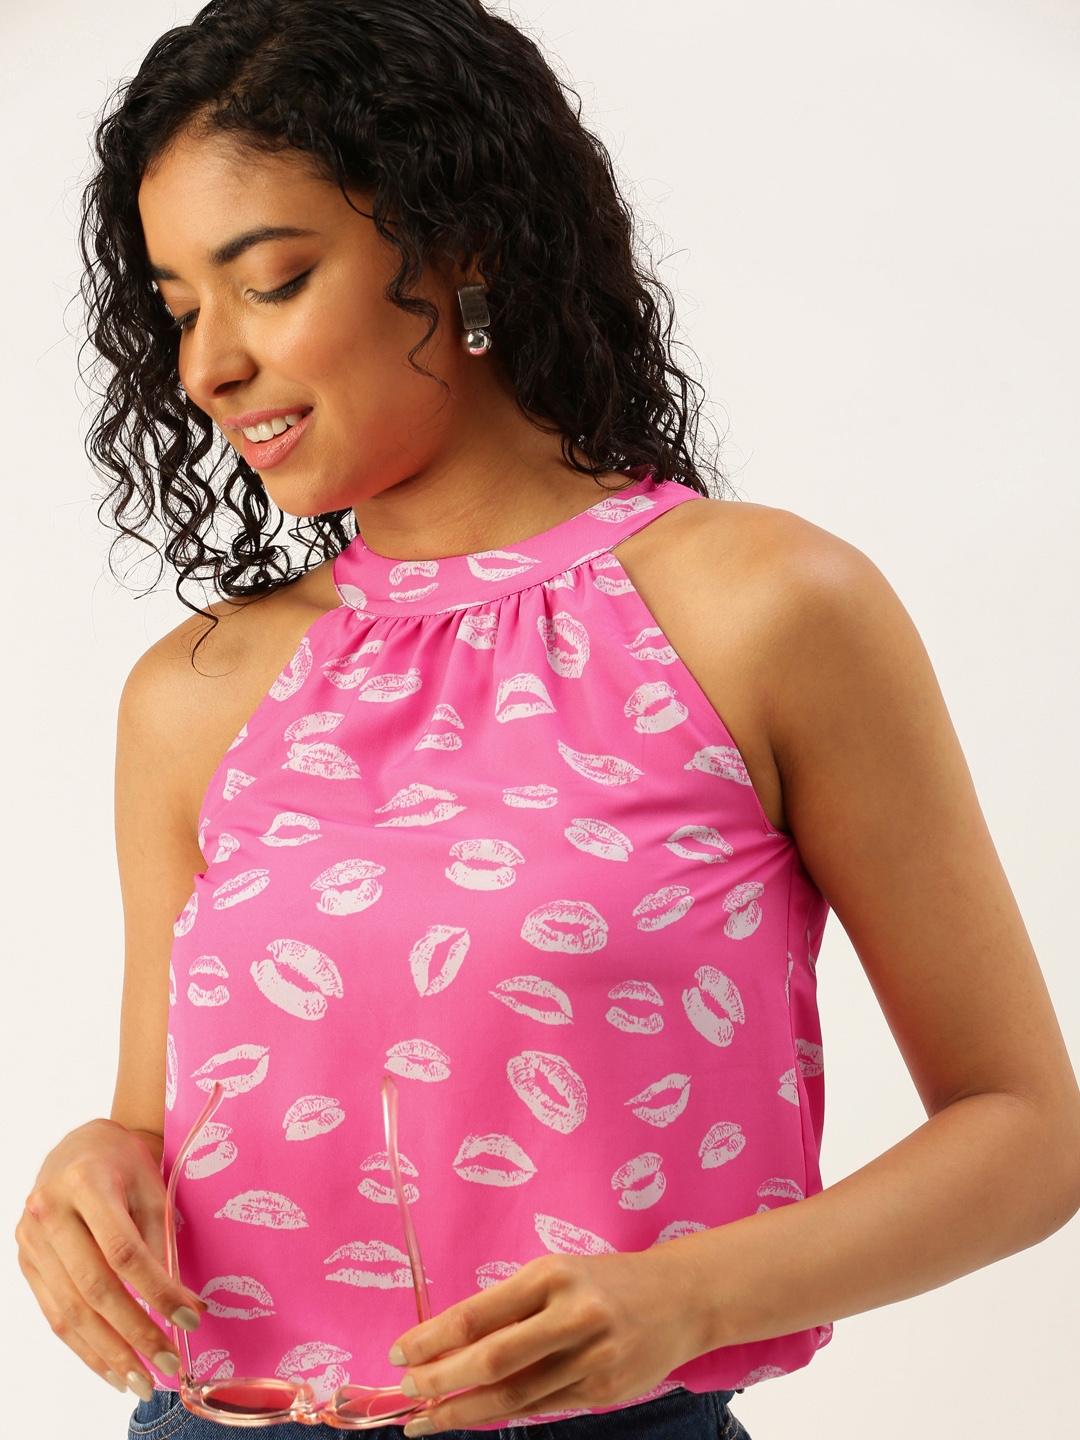 No Boundaries Solid Pink Tank Top Size XXL - 69% off